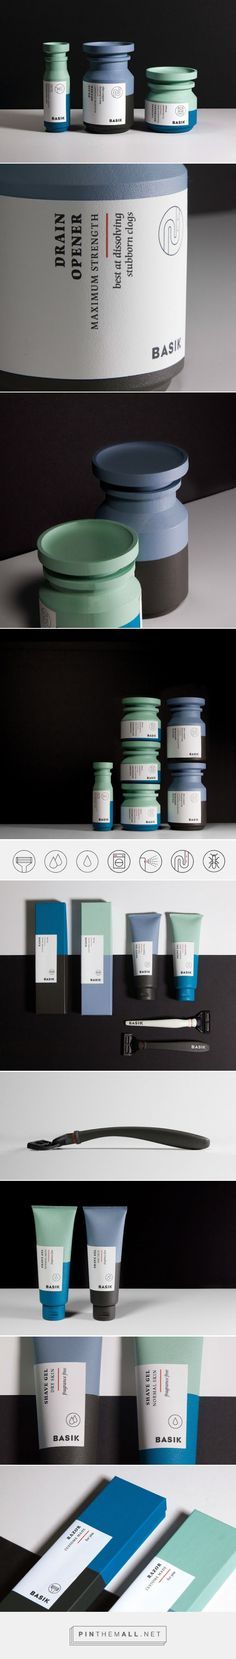 Packaging pour homme. Couleurs. Creative Packaging Design, Product Packaging